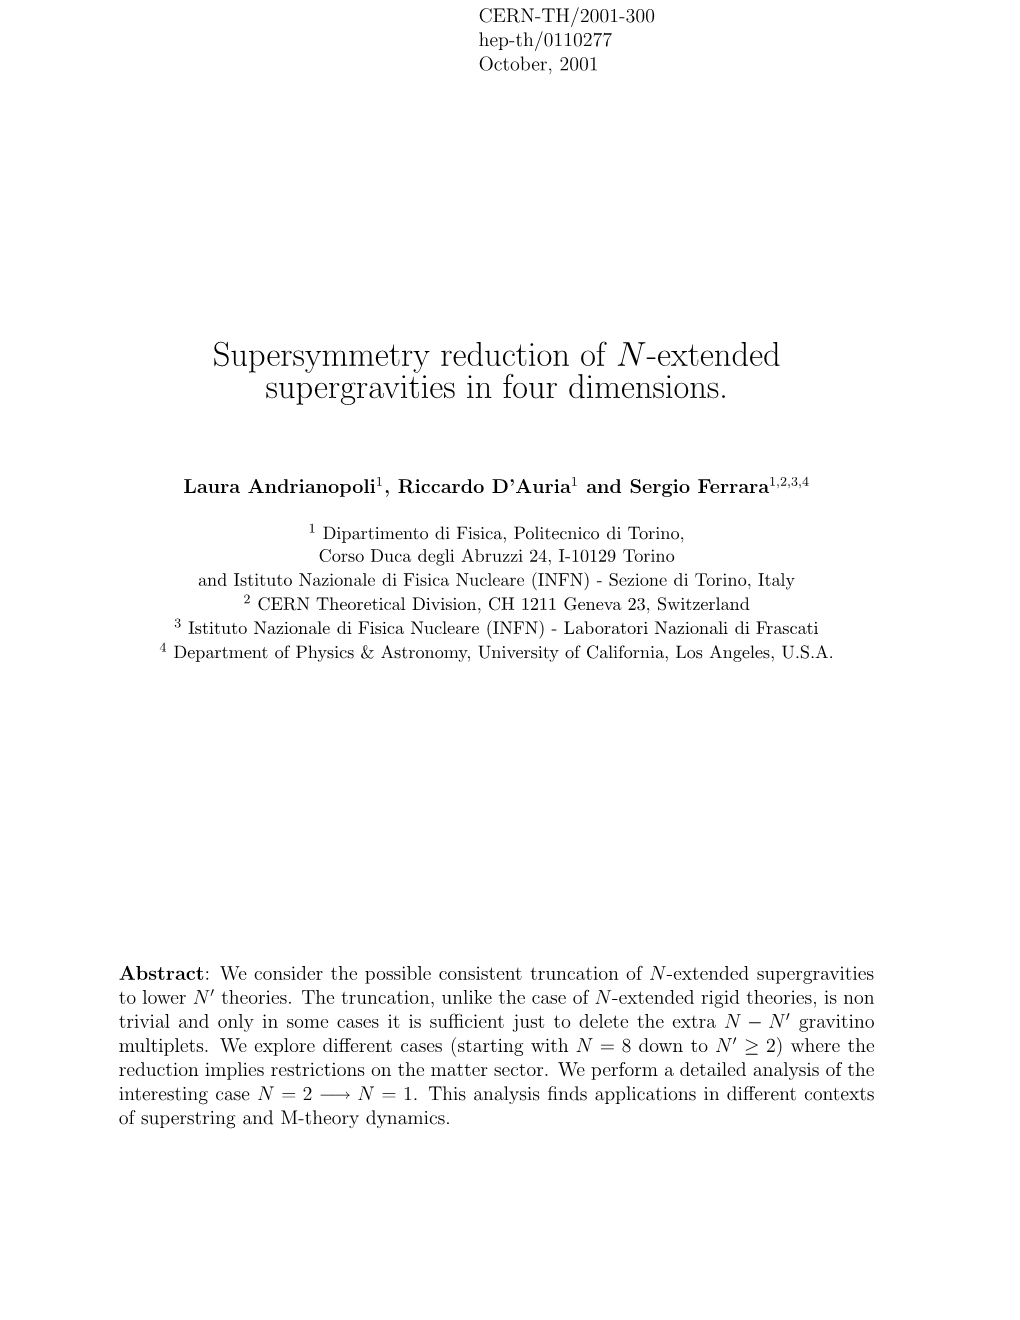 Supersymmetry Reduction of N-Extended Supergravities in Four Dimensions